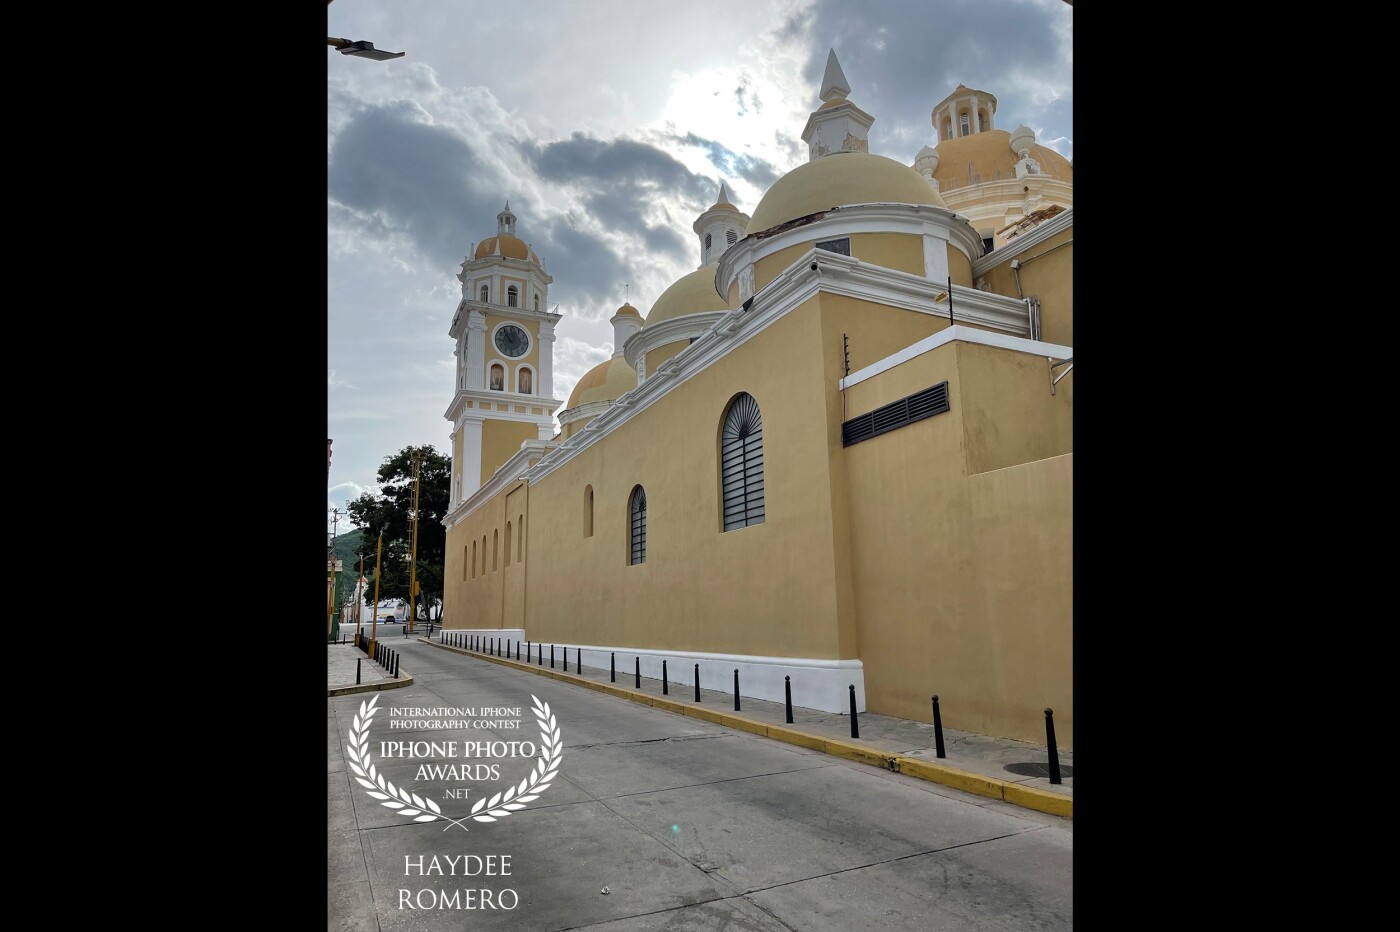 The Cathedral Basilica of Our Lady of Help or the Cathedral of Valencia is the most important religious site in Valencia, Venezuela. It is situated in the center of the city opposite the Plaza Bolivar.